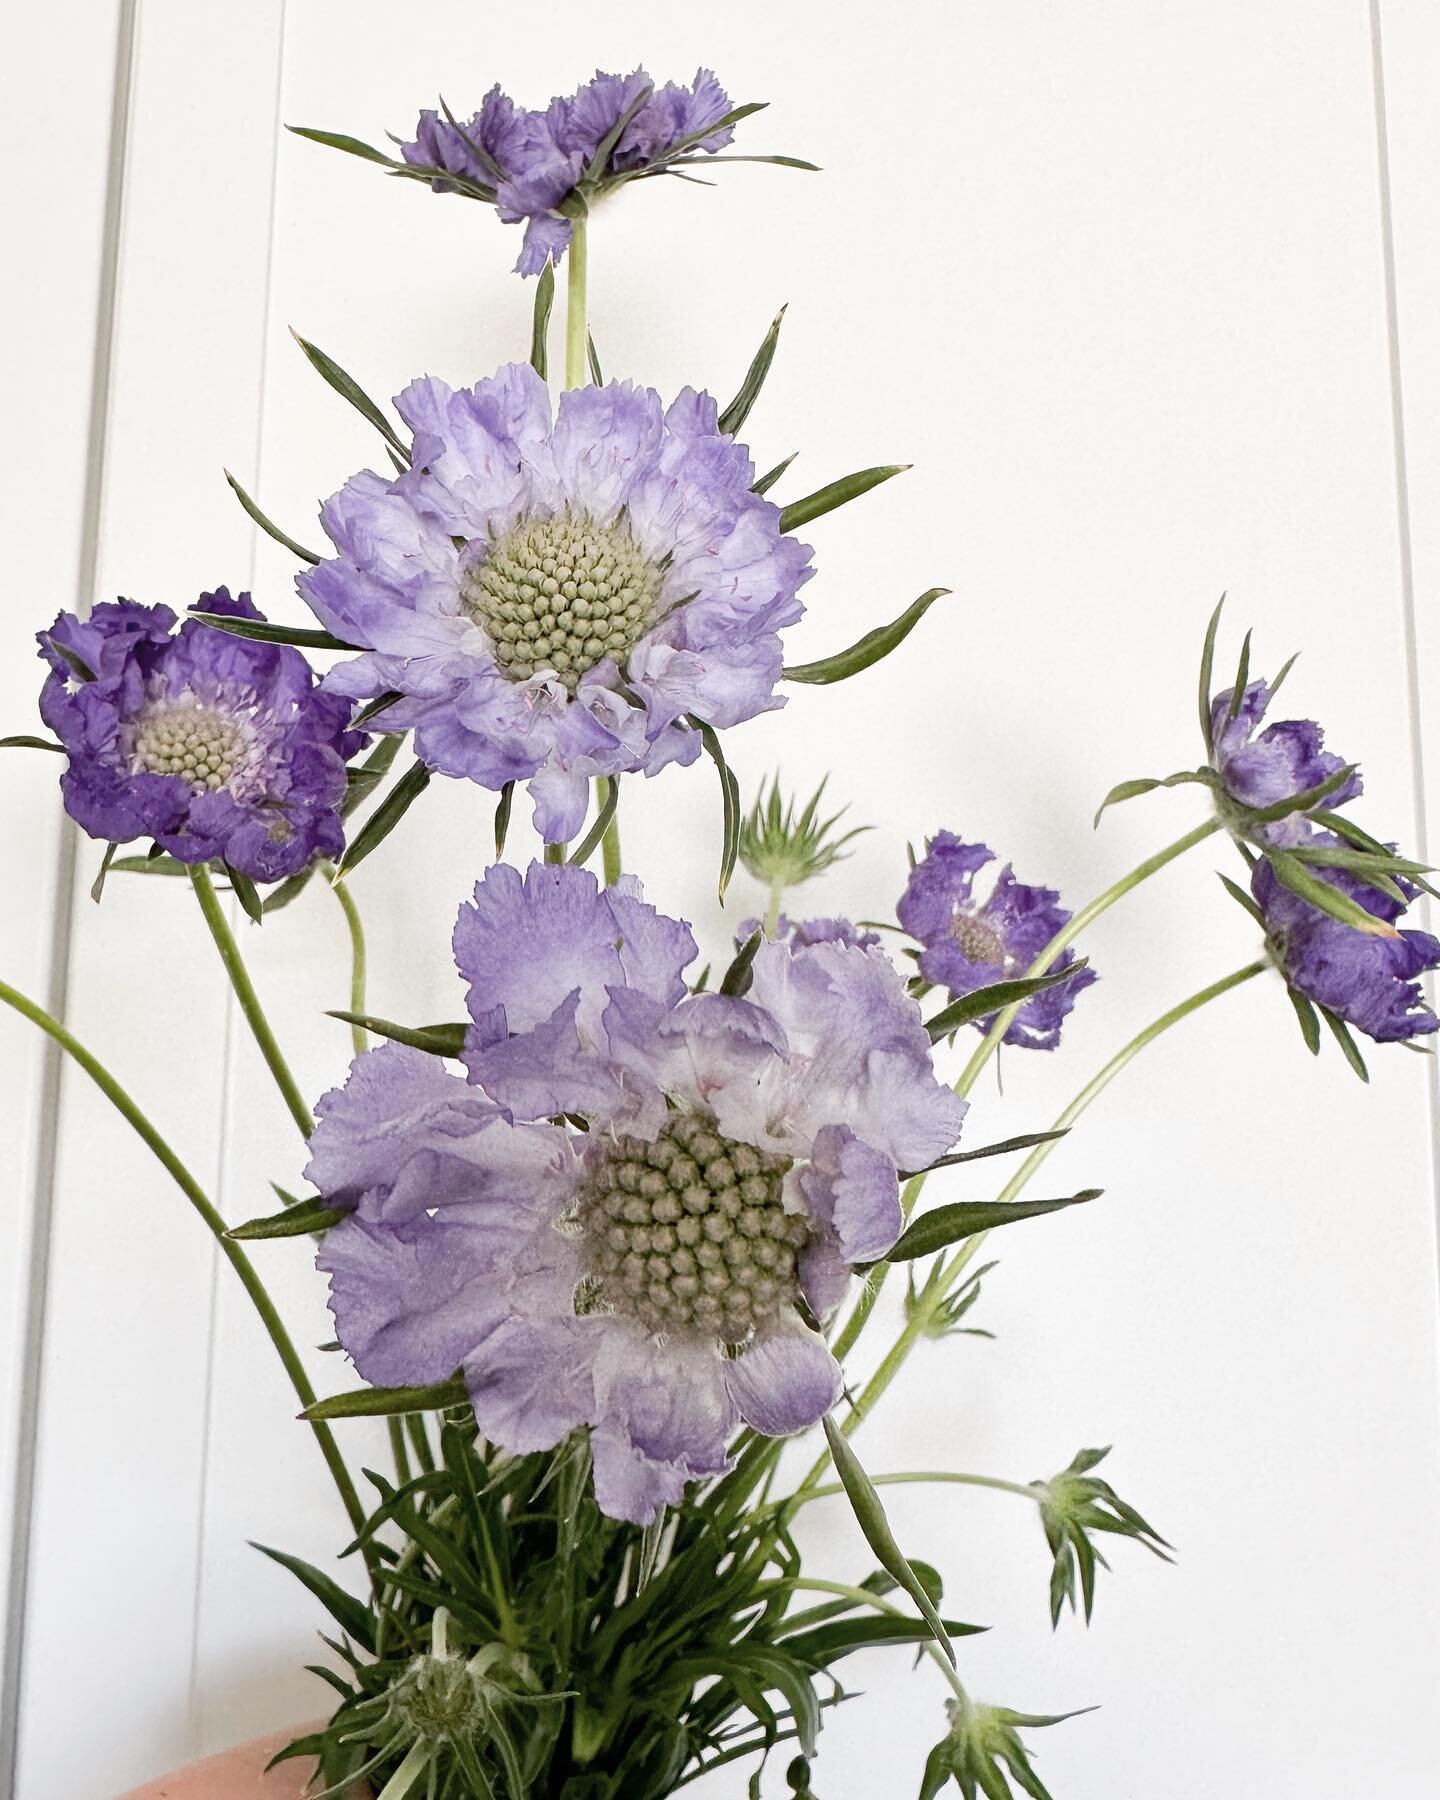 Fama Scabiosa is quickly becoming one of my favorites here on the farm. A great low investment perennial as it is pretty easy to start from seed. She produces good year one, but year two yields an even better crop with slightly bigger flower heads. F